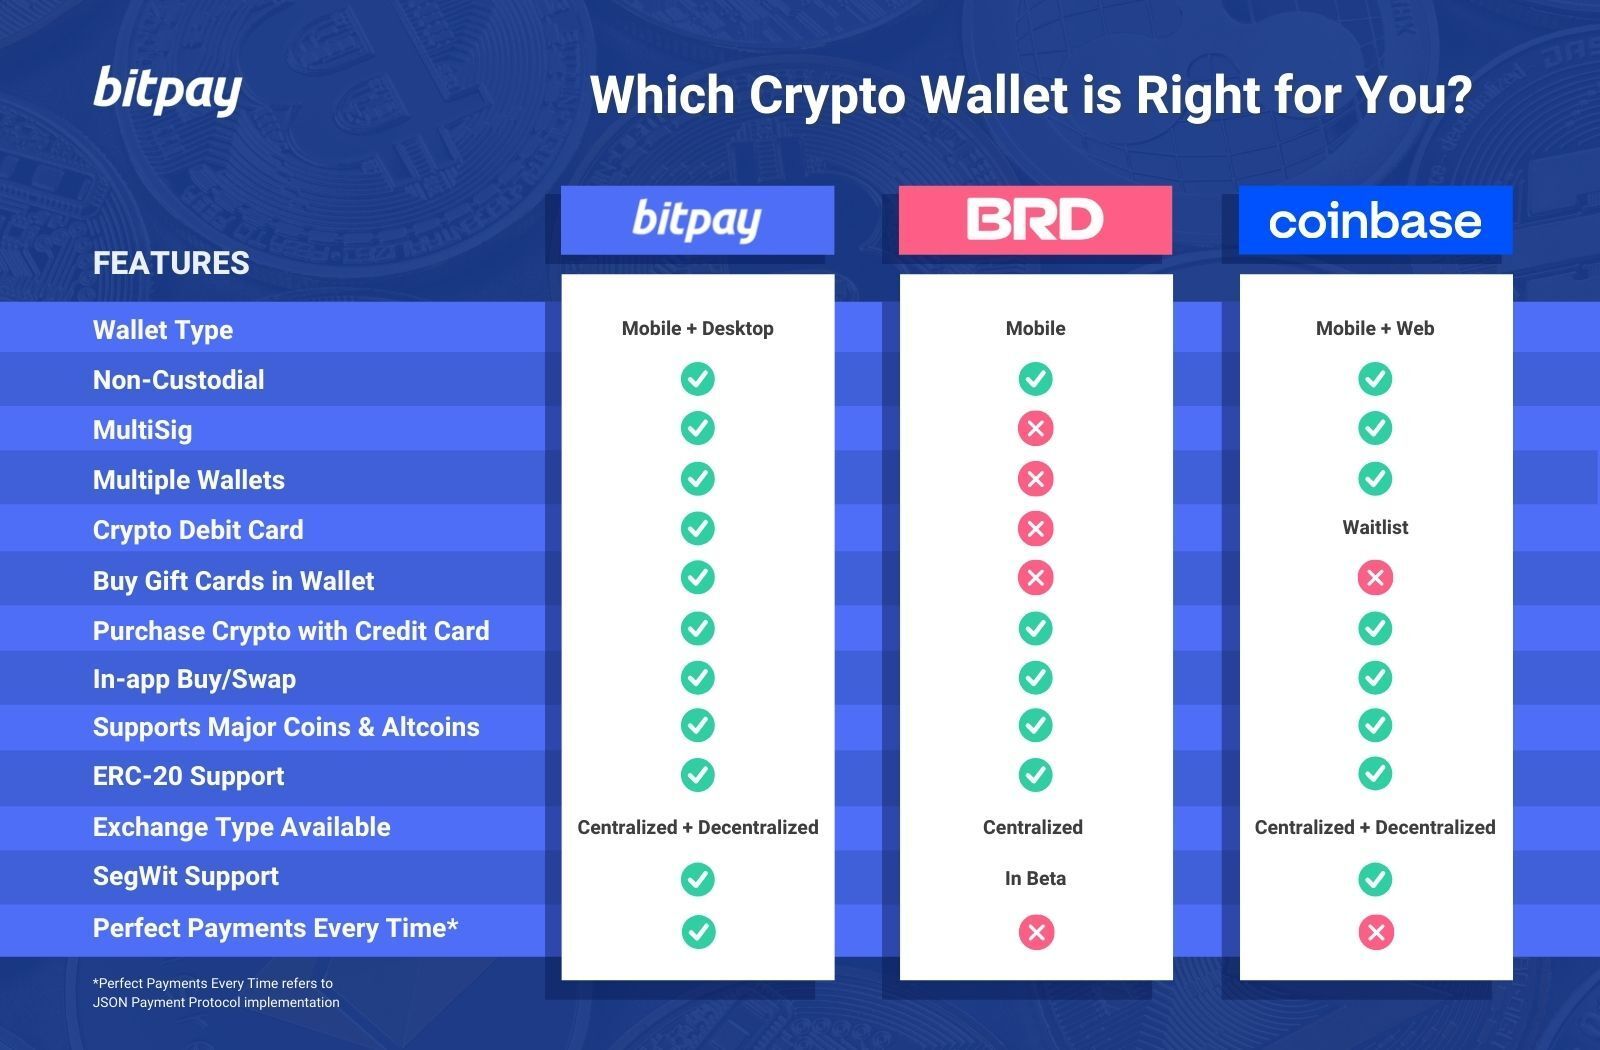 BitPay Wallet vs BRD and Coinbase: Which Crypto Wallet is Right for You?